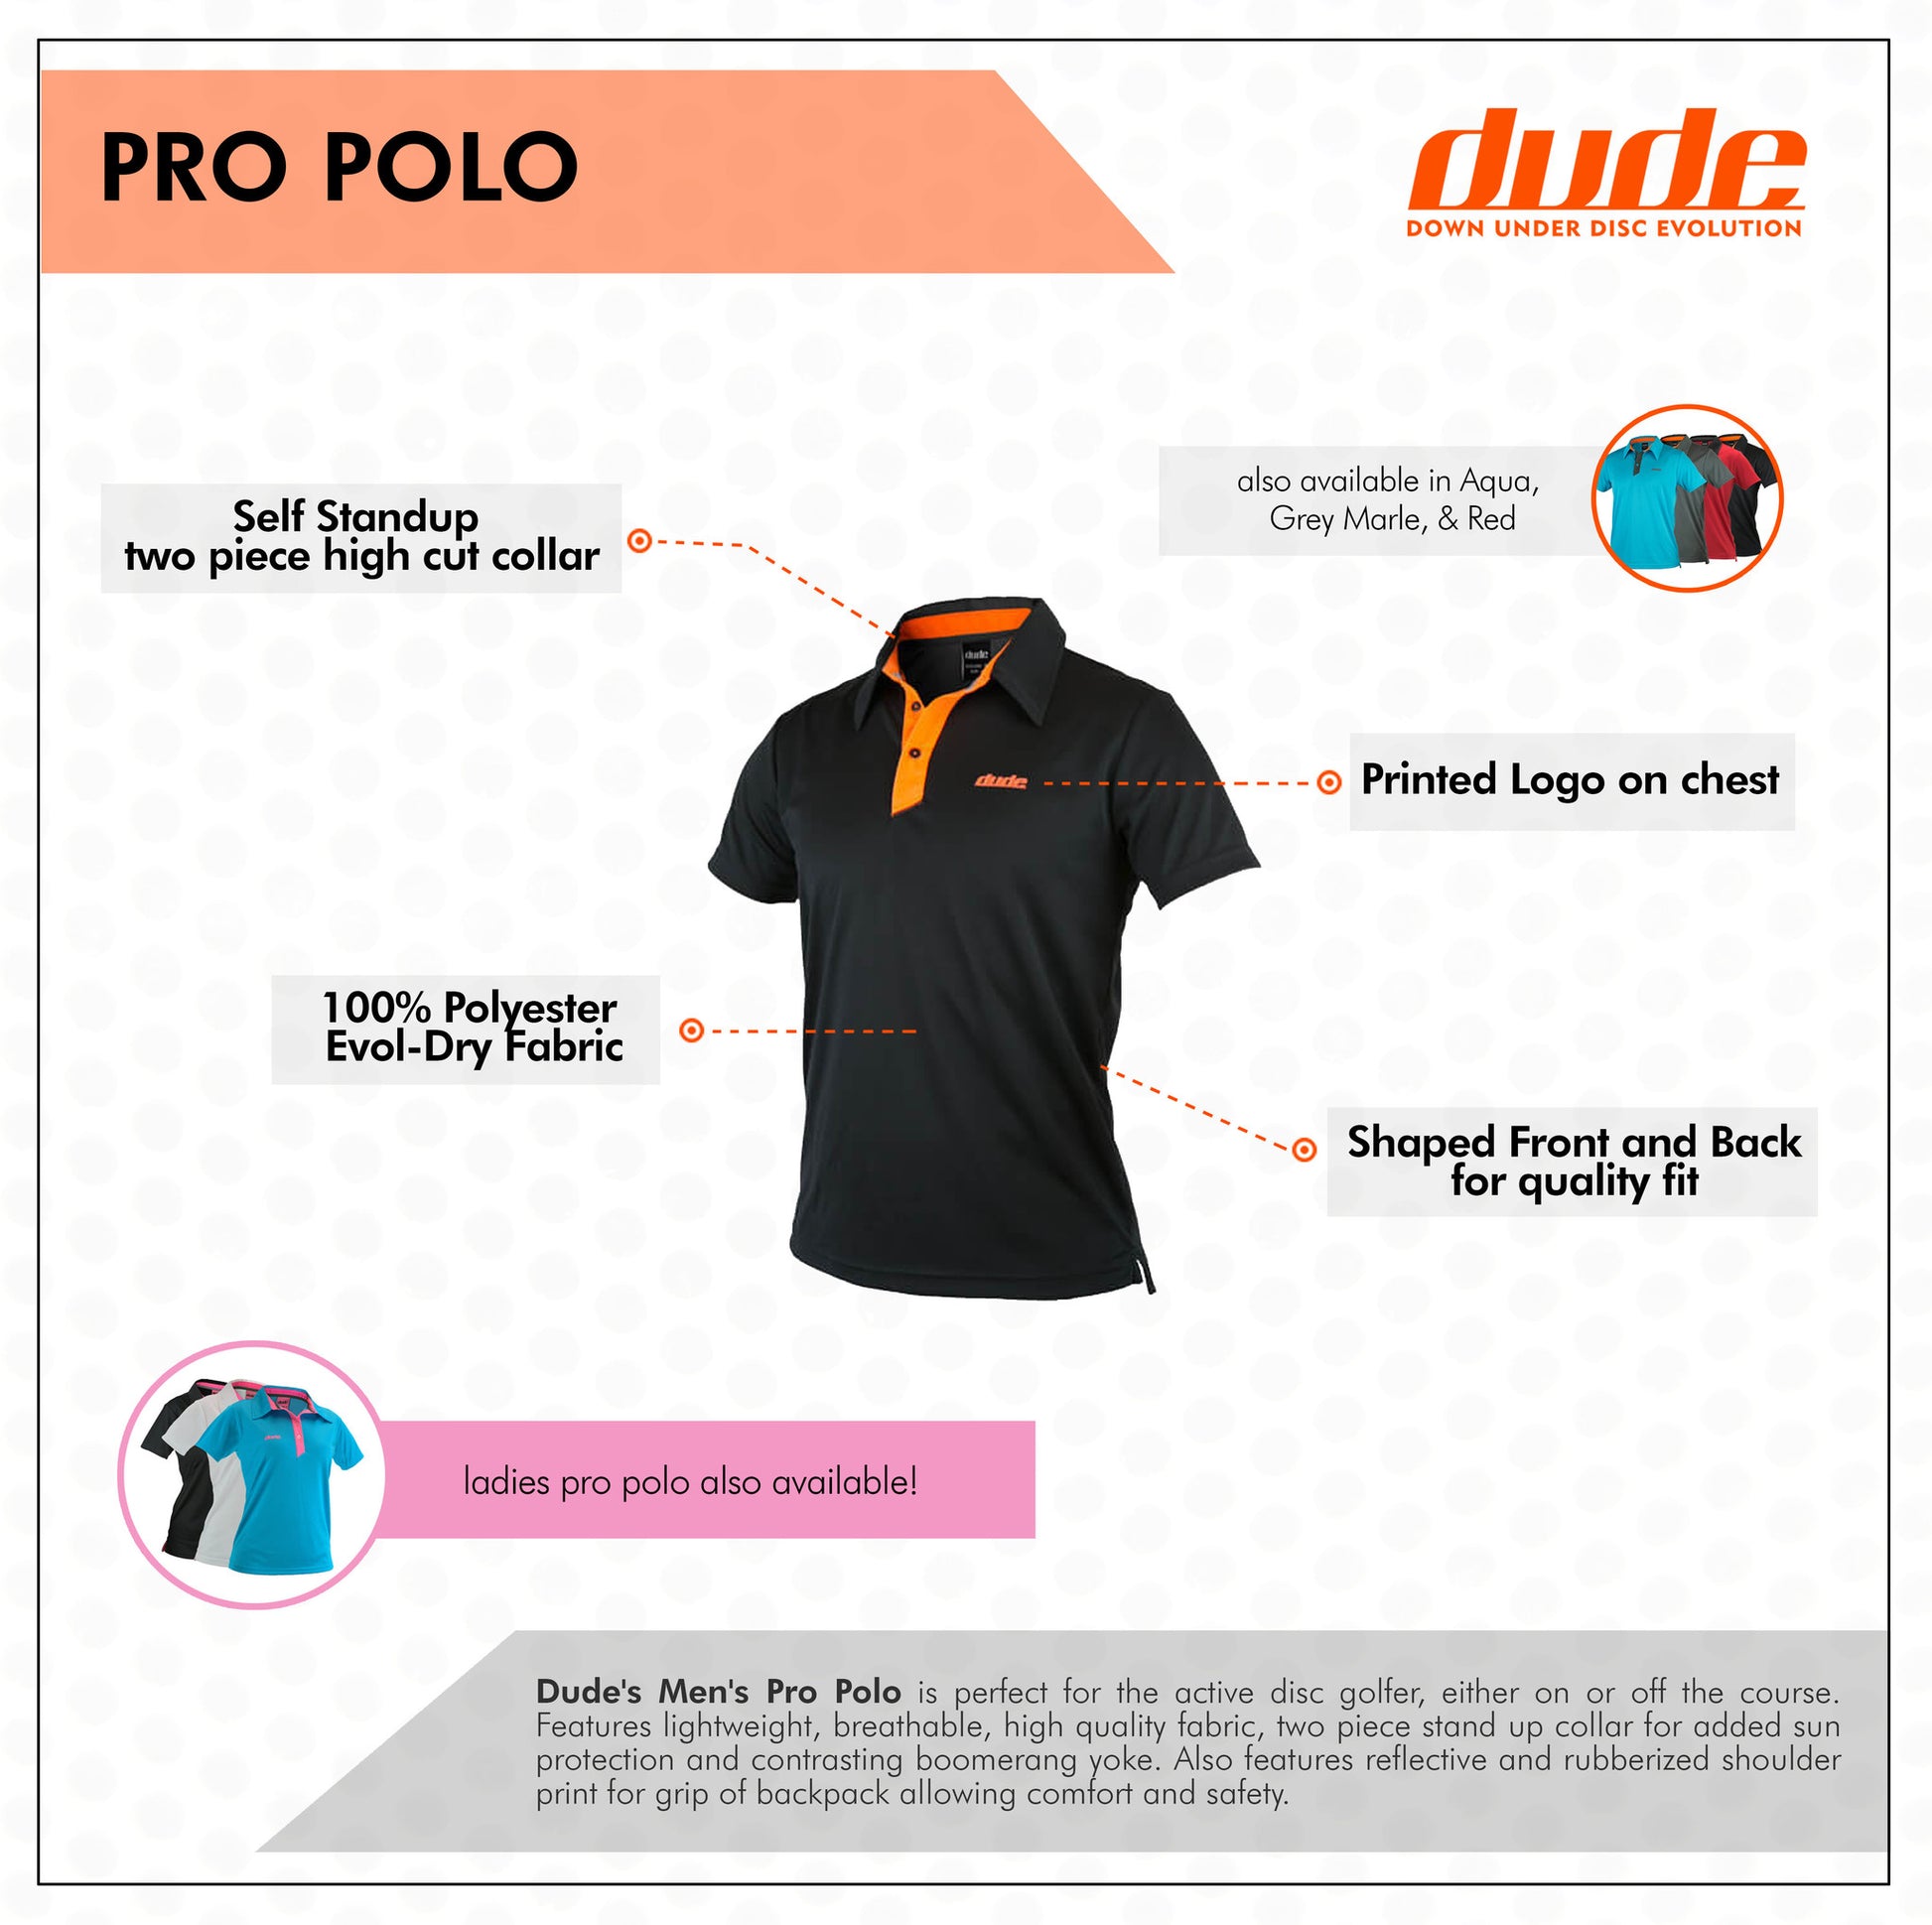 An image of Dude Pro Polo in black color with features